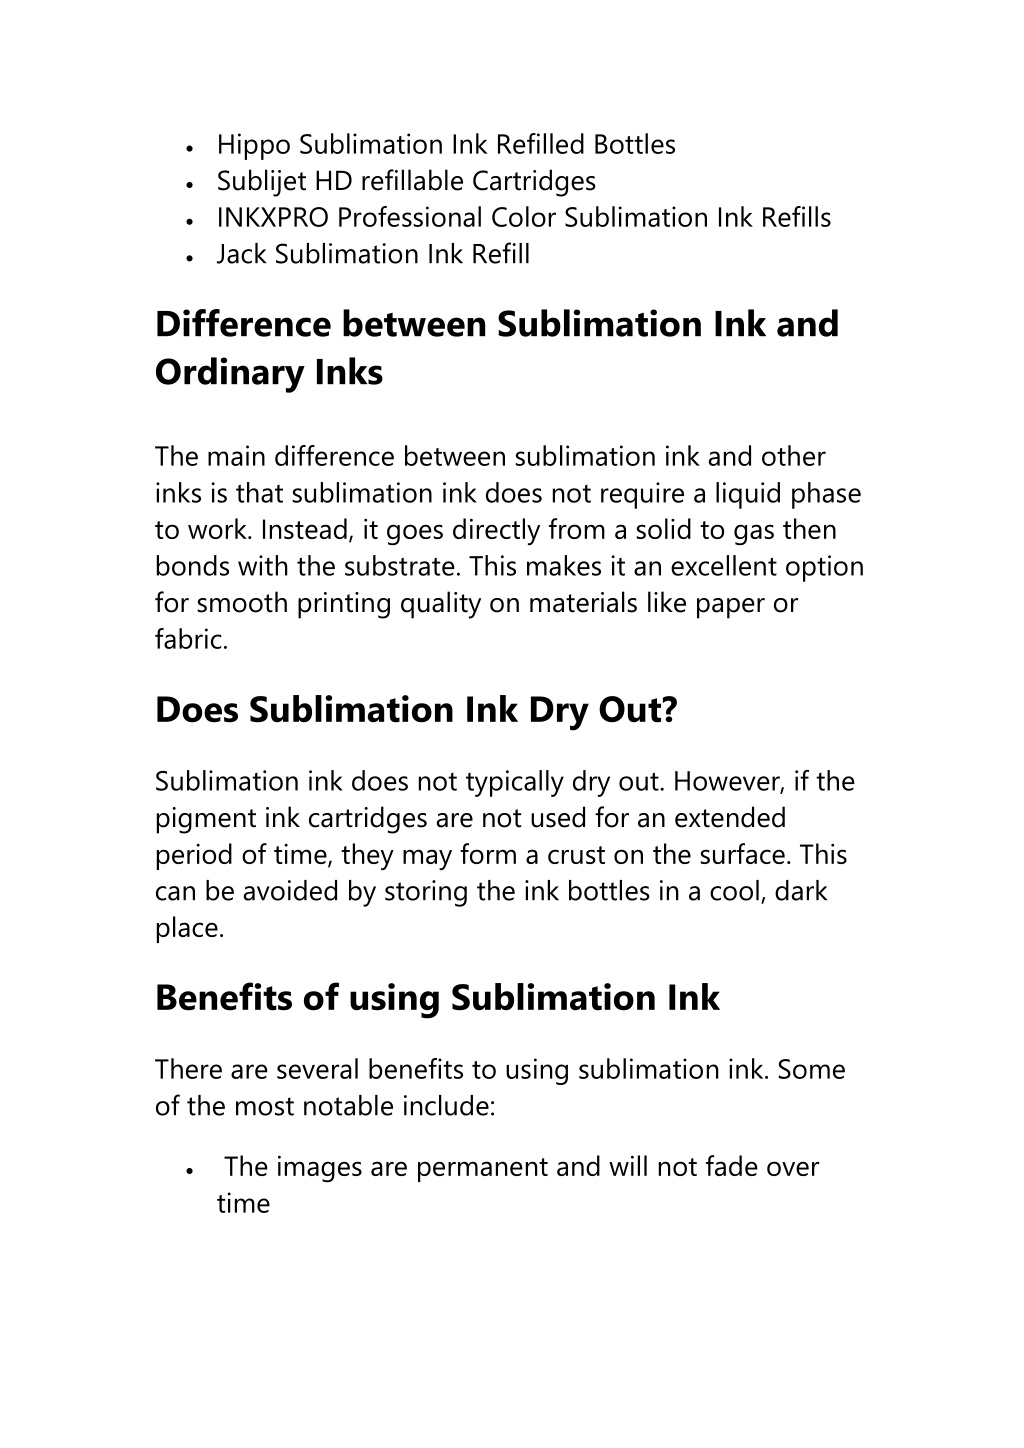 Ppt Best Sublimation Ink For Your Printer Buyers Guide Powerpoint Presentation Id11450870 2817